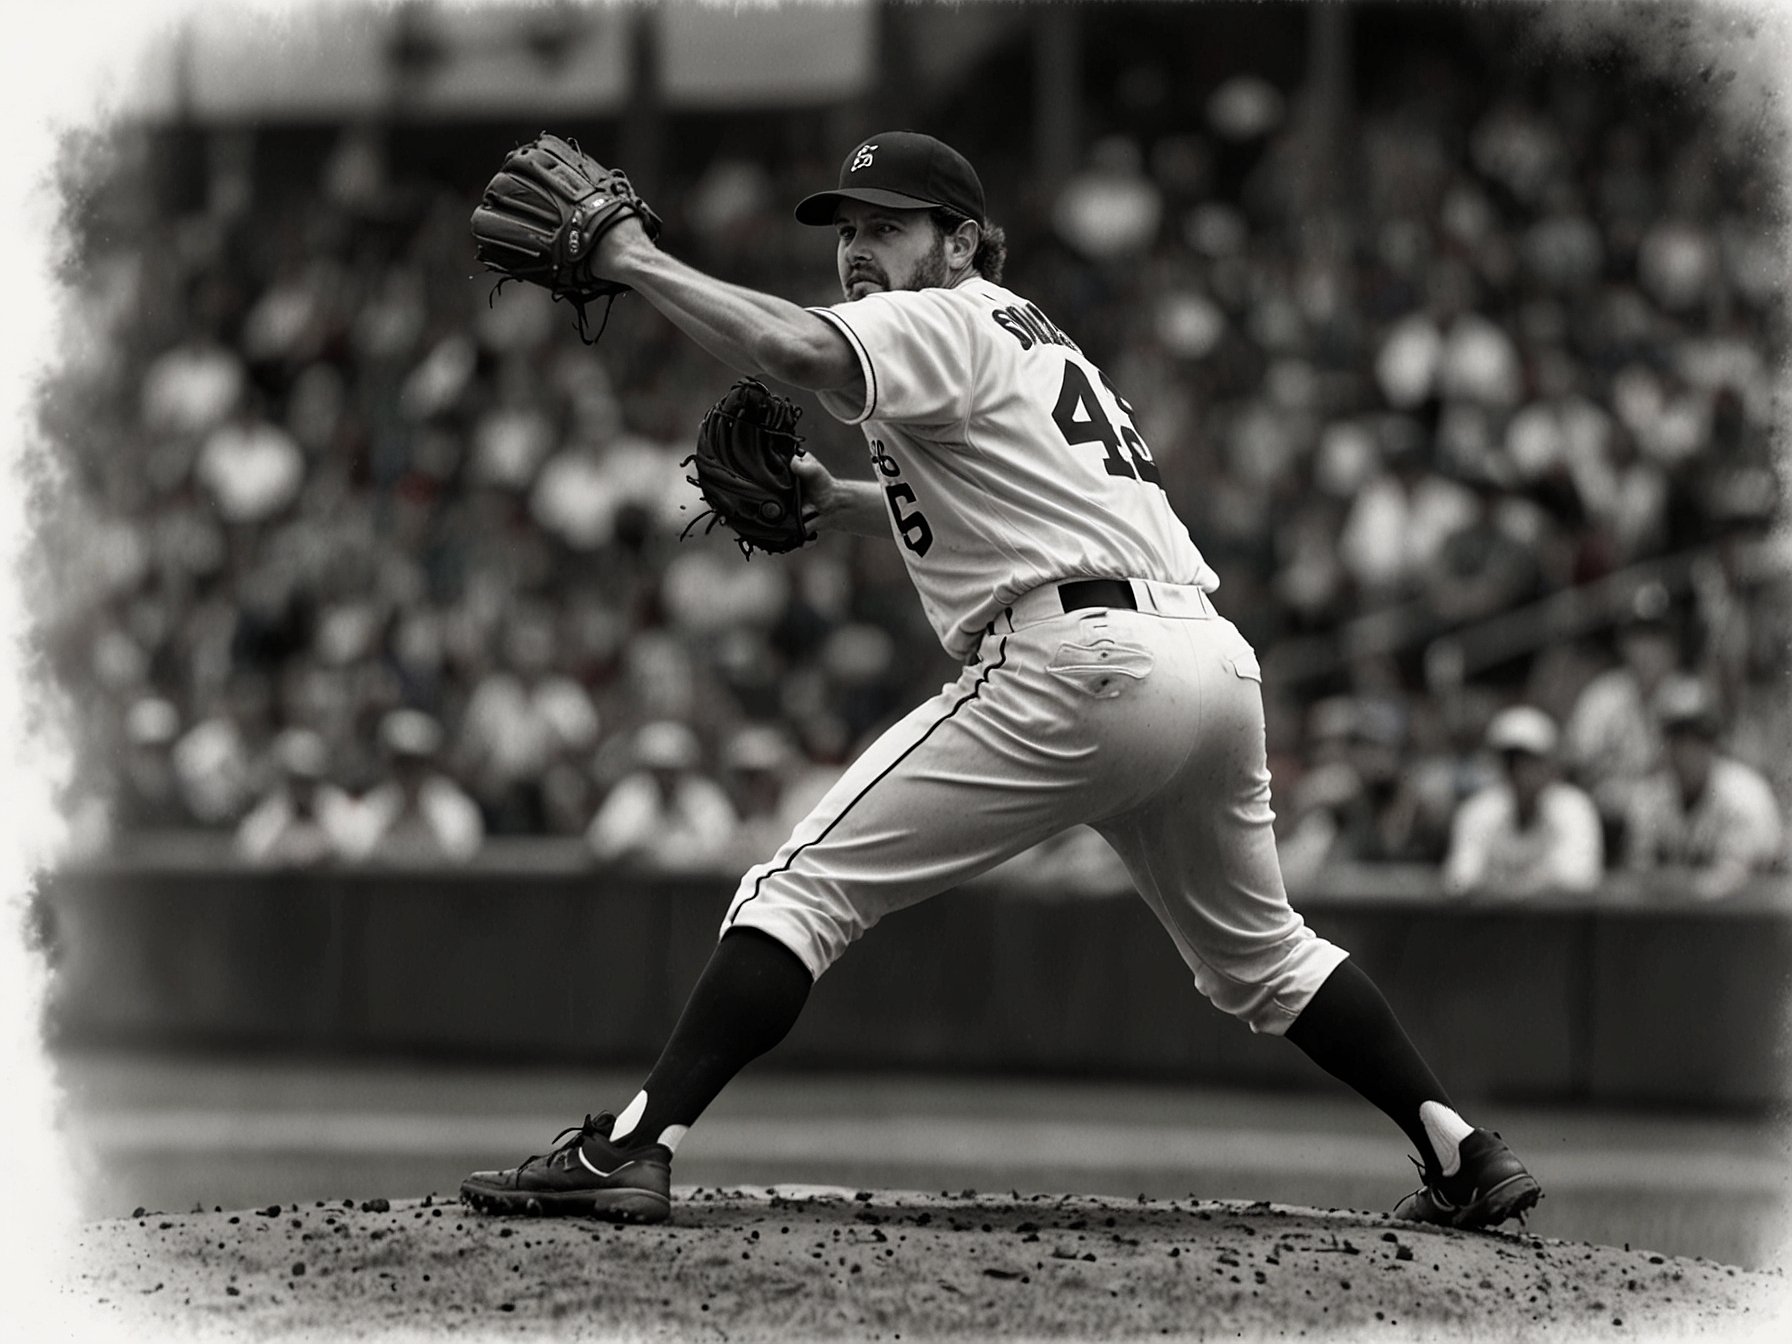 Image of Paul Skenes on the mound during the game against the Cincinnati Reds, showcasing his powerful pitching arm and focused demeanor as he delivers a fastball.